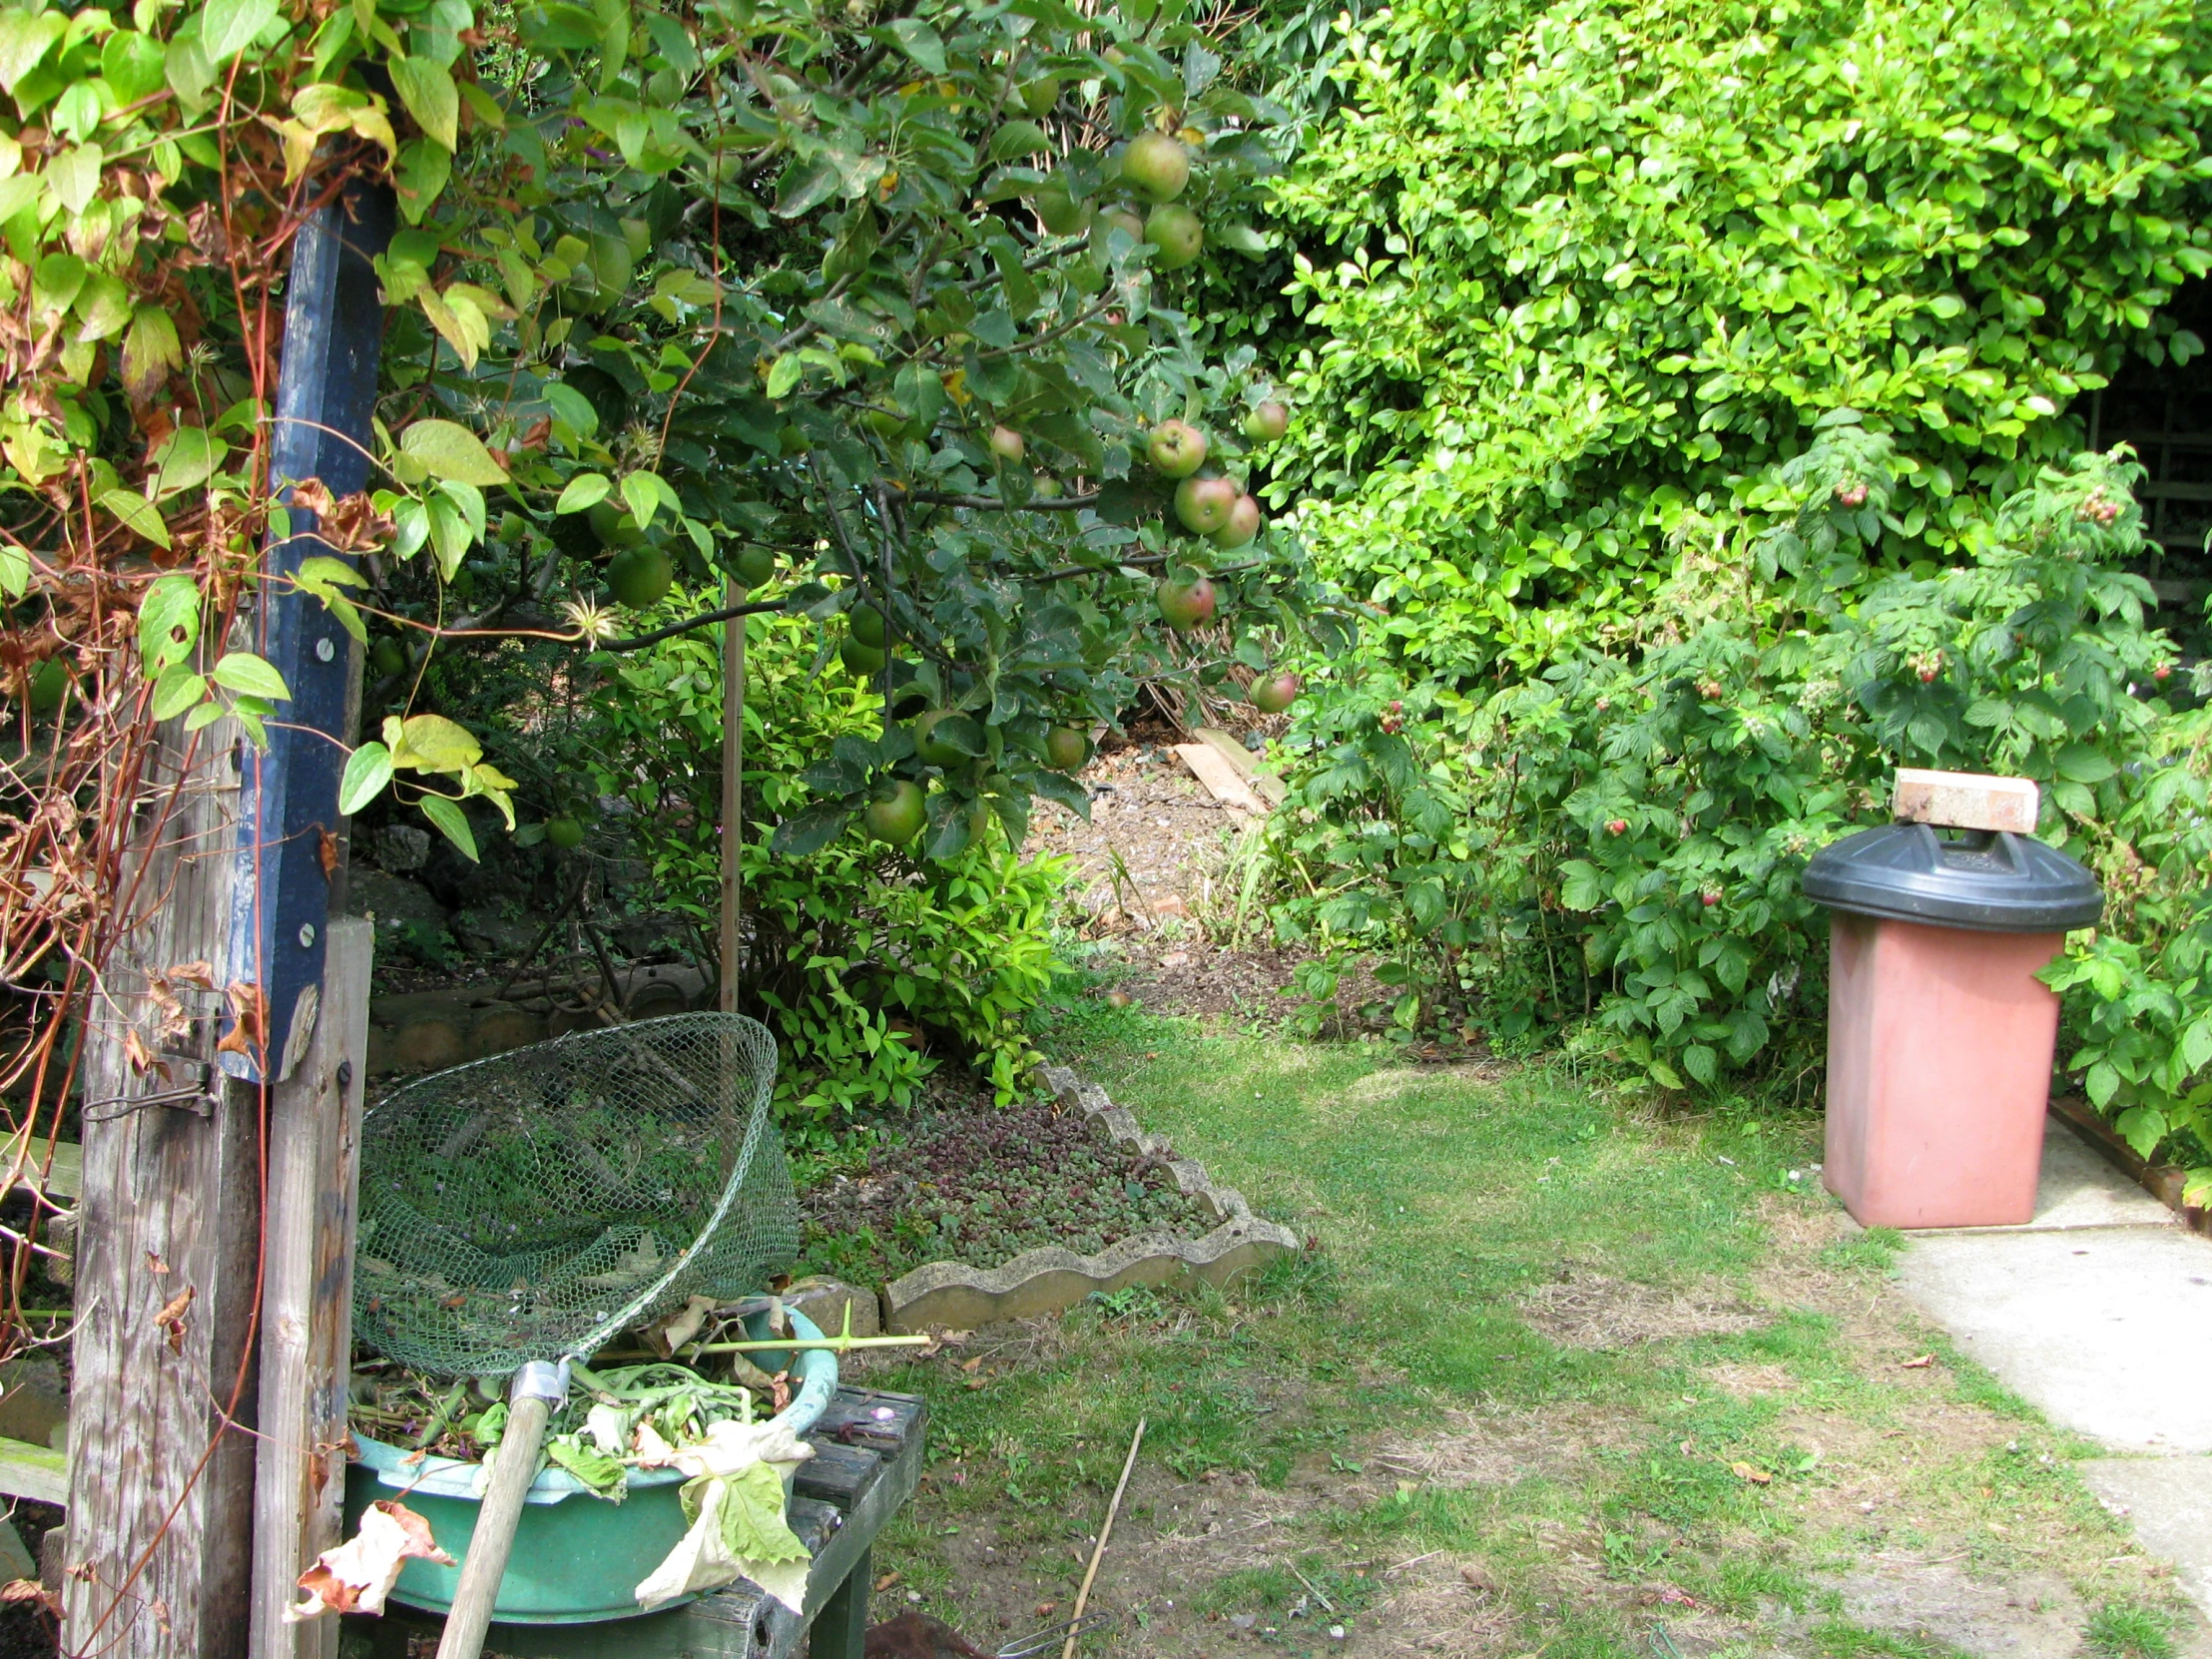 an overgrown backyard is seen with plastic garbage cans